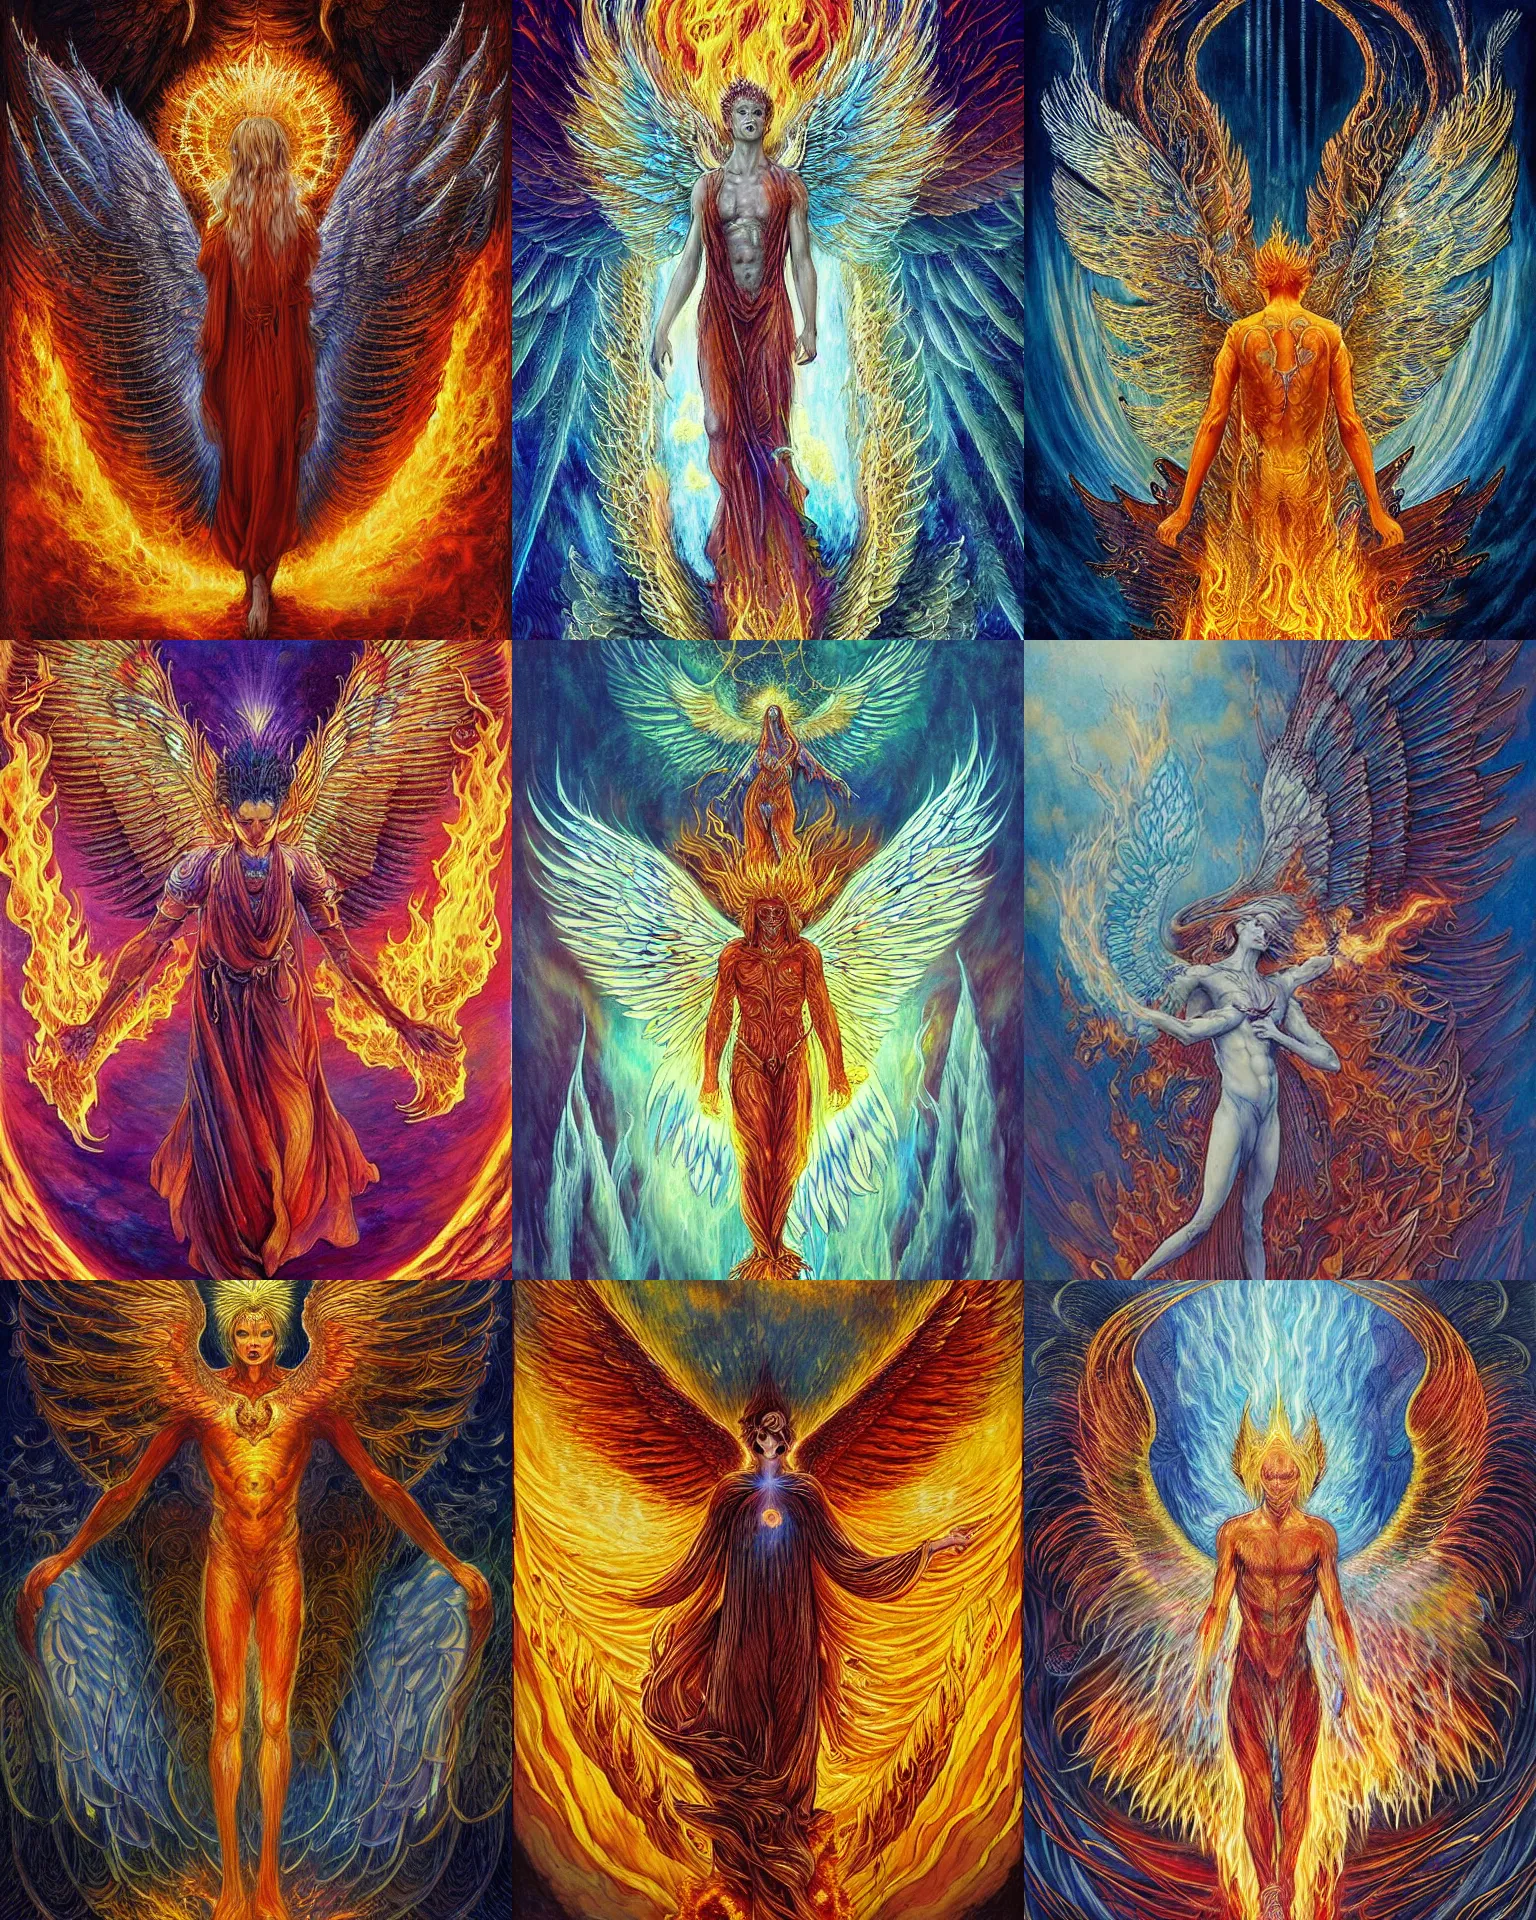 Prompt: angelic fiery male seraphim, male humanoid figure made of fire, wings of fire, halo of fire, body of pure fire, surrounded by flames, descending from the heavens, highly detailed, cinematic, dramatic, sublime, wide angle, style of daniel merriam, aaron horkey, alena aenami, alex grey, jim burns, josephine wall, kelly mckernan